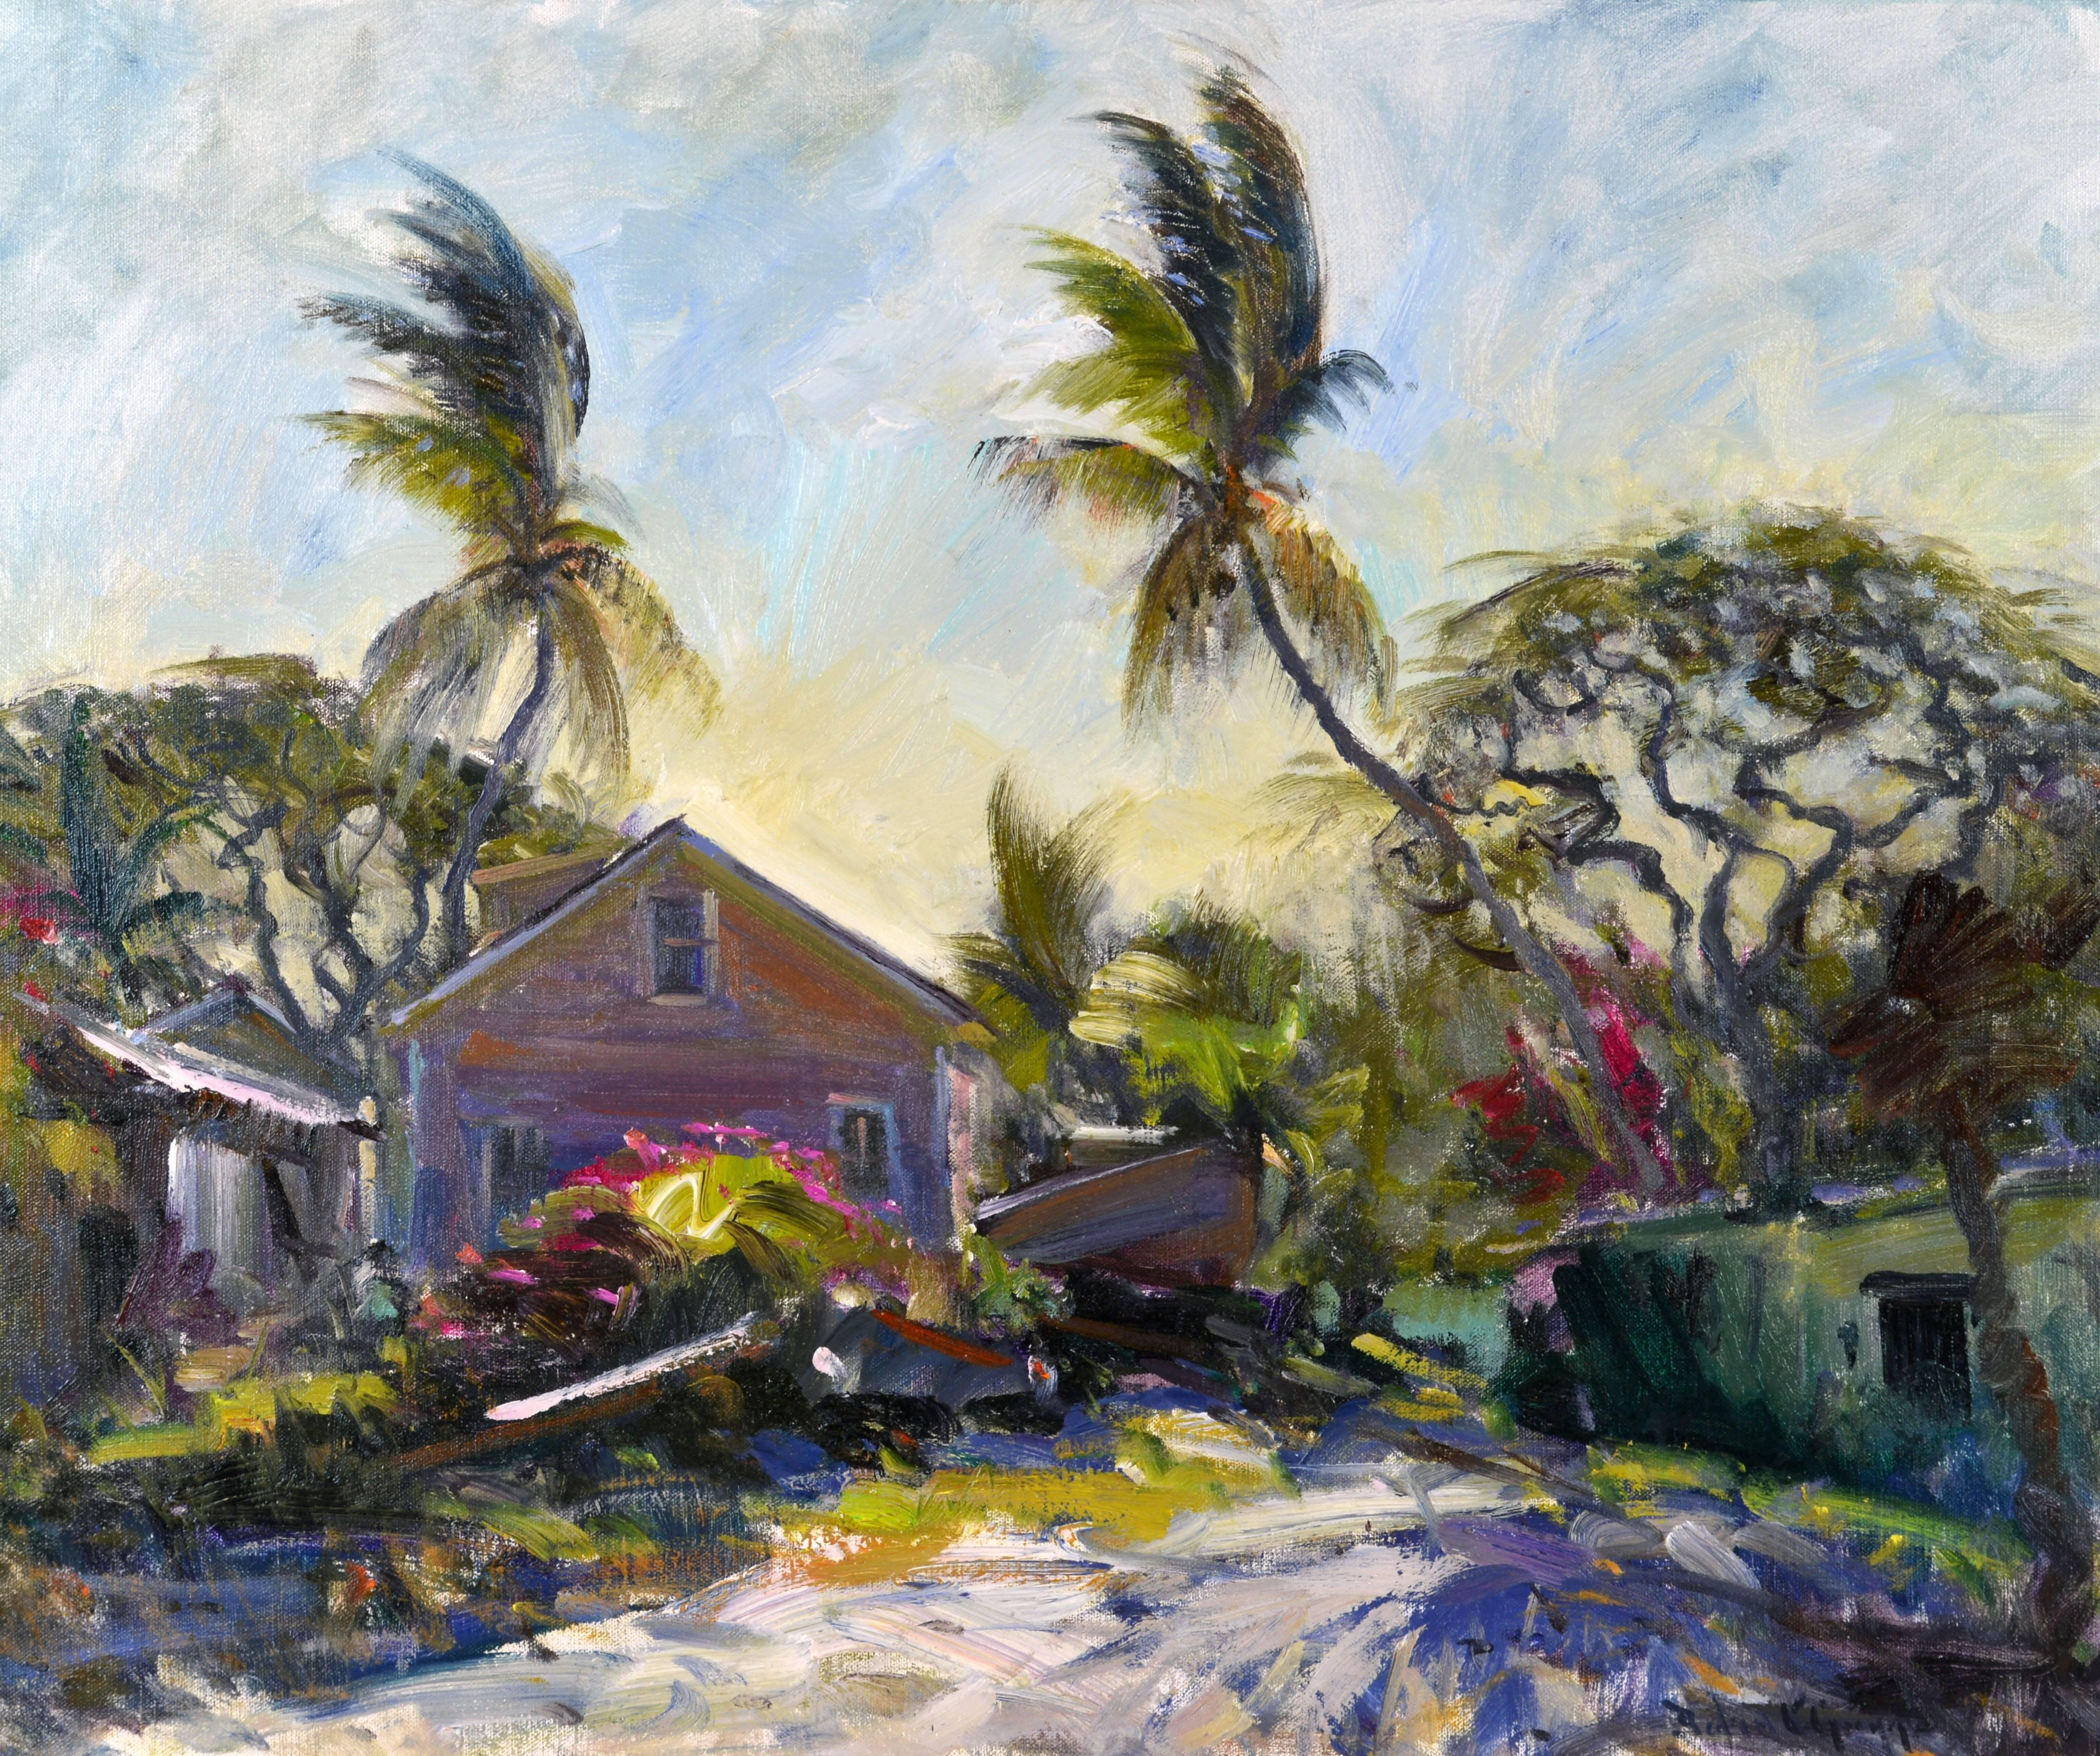 In this vibrant 25 x 30 in. oil on canvas by legendary Robert C, Gruppe, American B. 1944, again discovers the beauty of views mostly hidden for others capturing with light and color a Florida that may soon be history. Signed on the front and titled